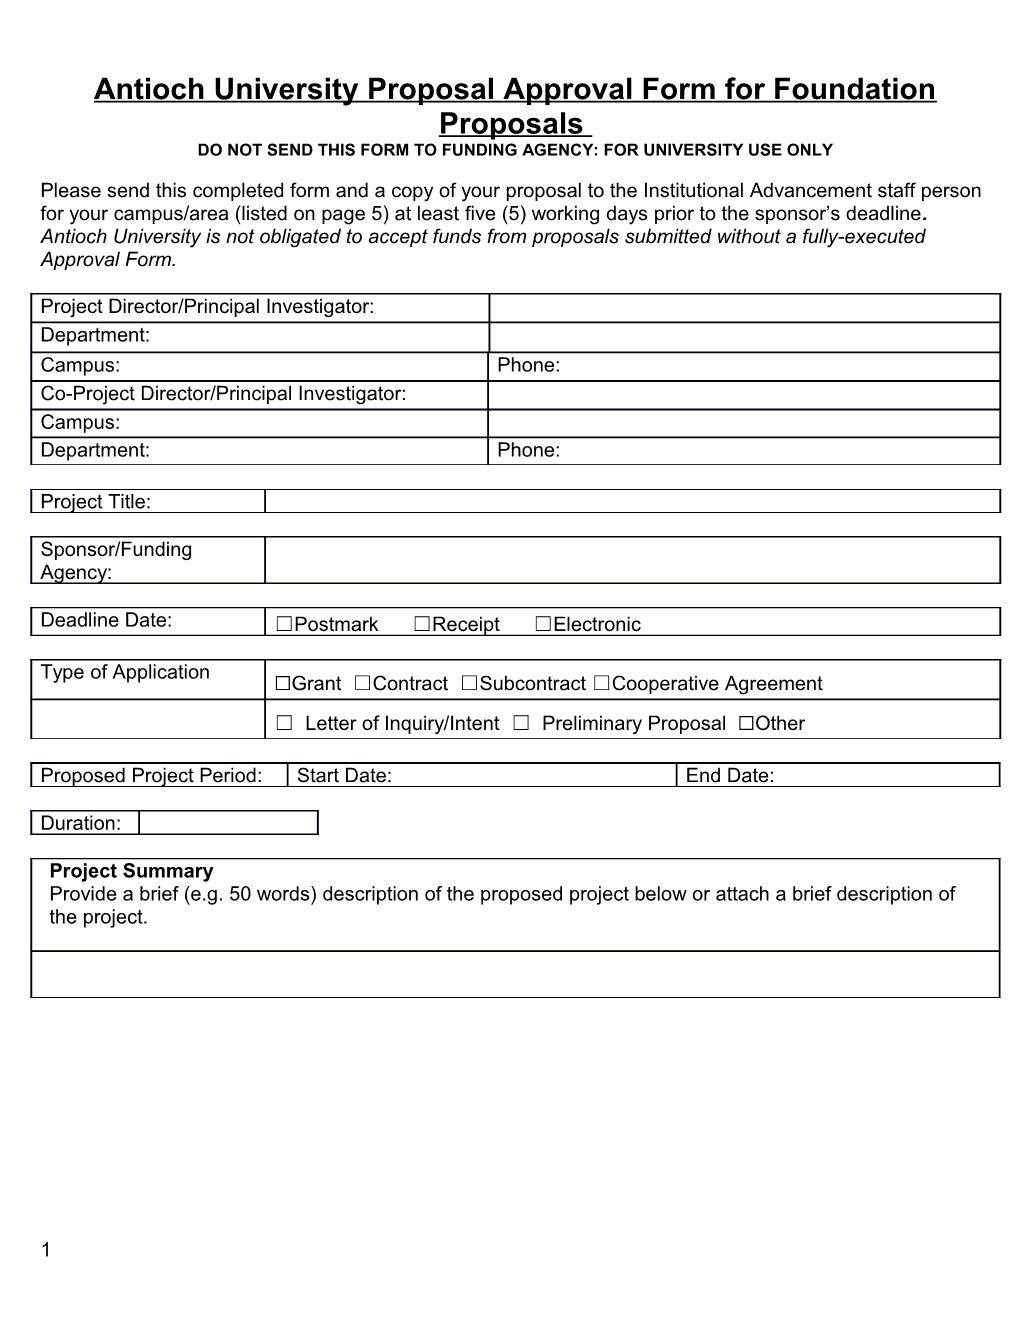 Antioch University Proposal Approval Form for Foundation Proposals